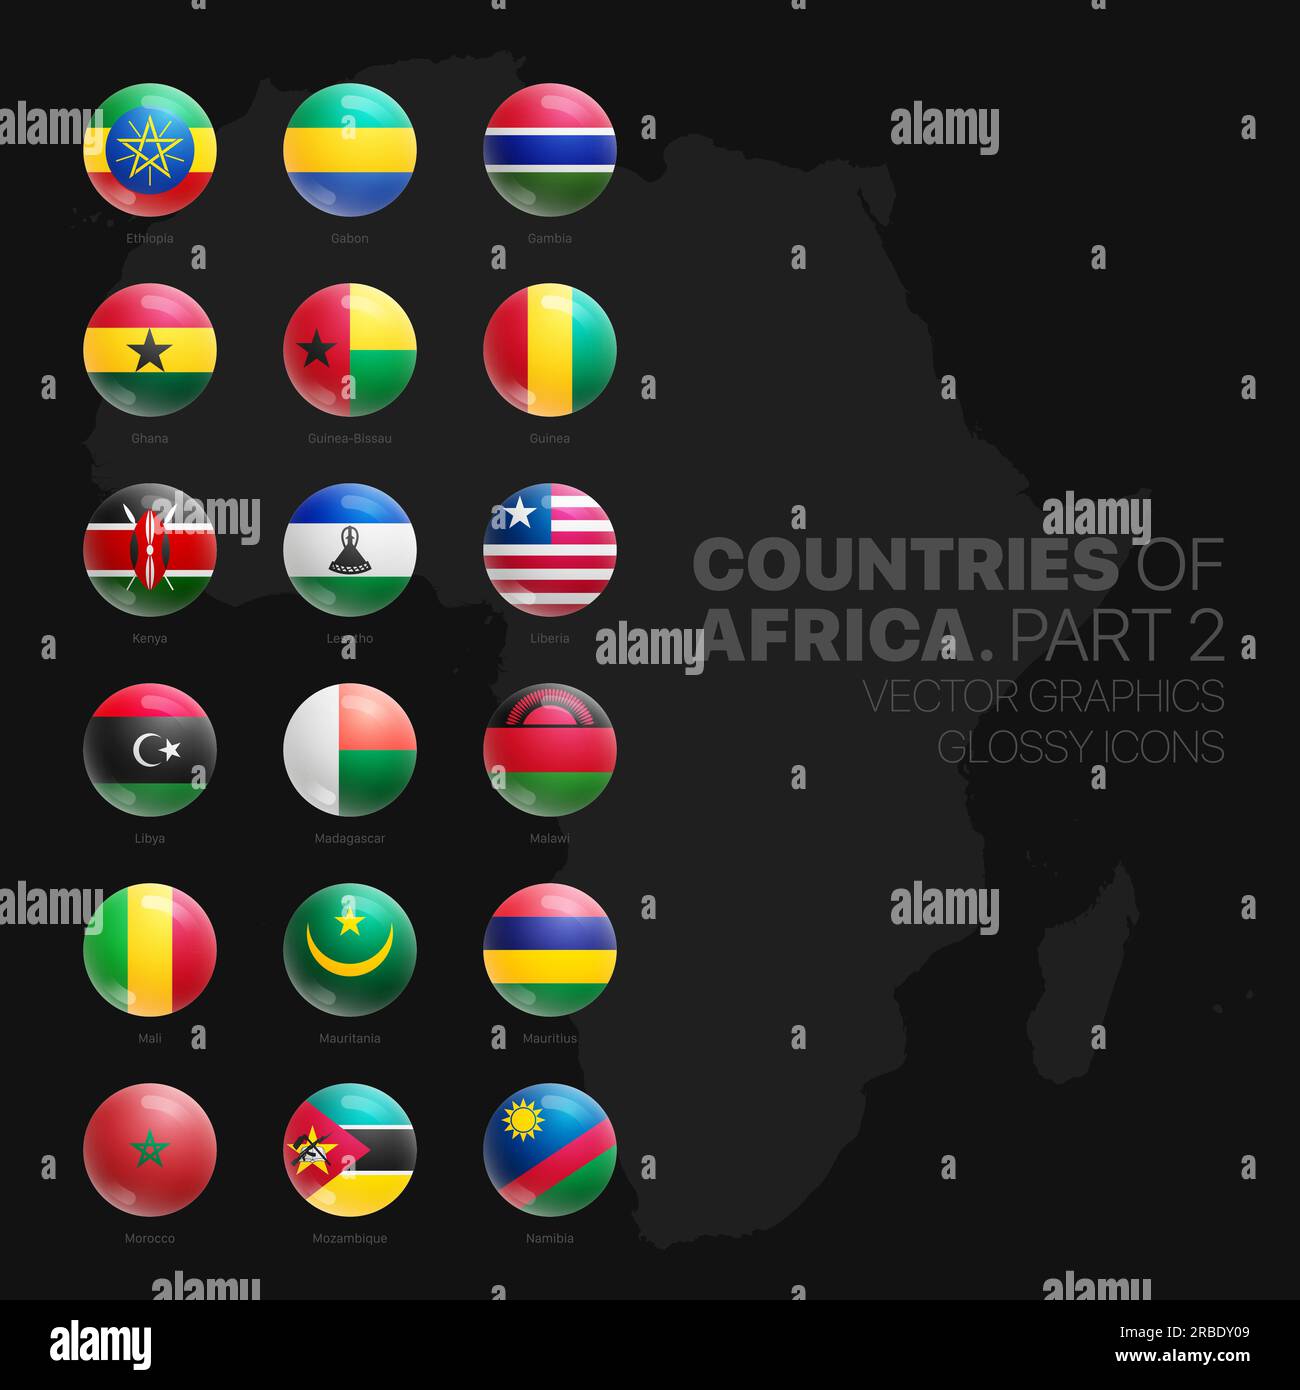 African Countries Flags Stock Vector Images Alamy 3169